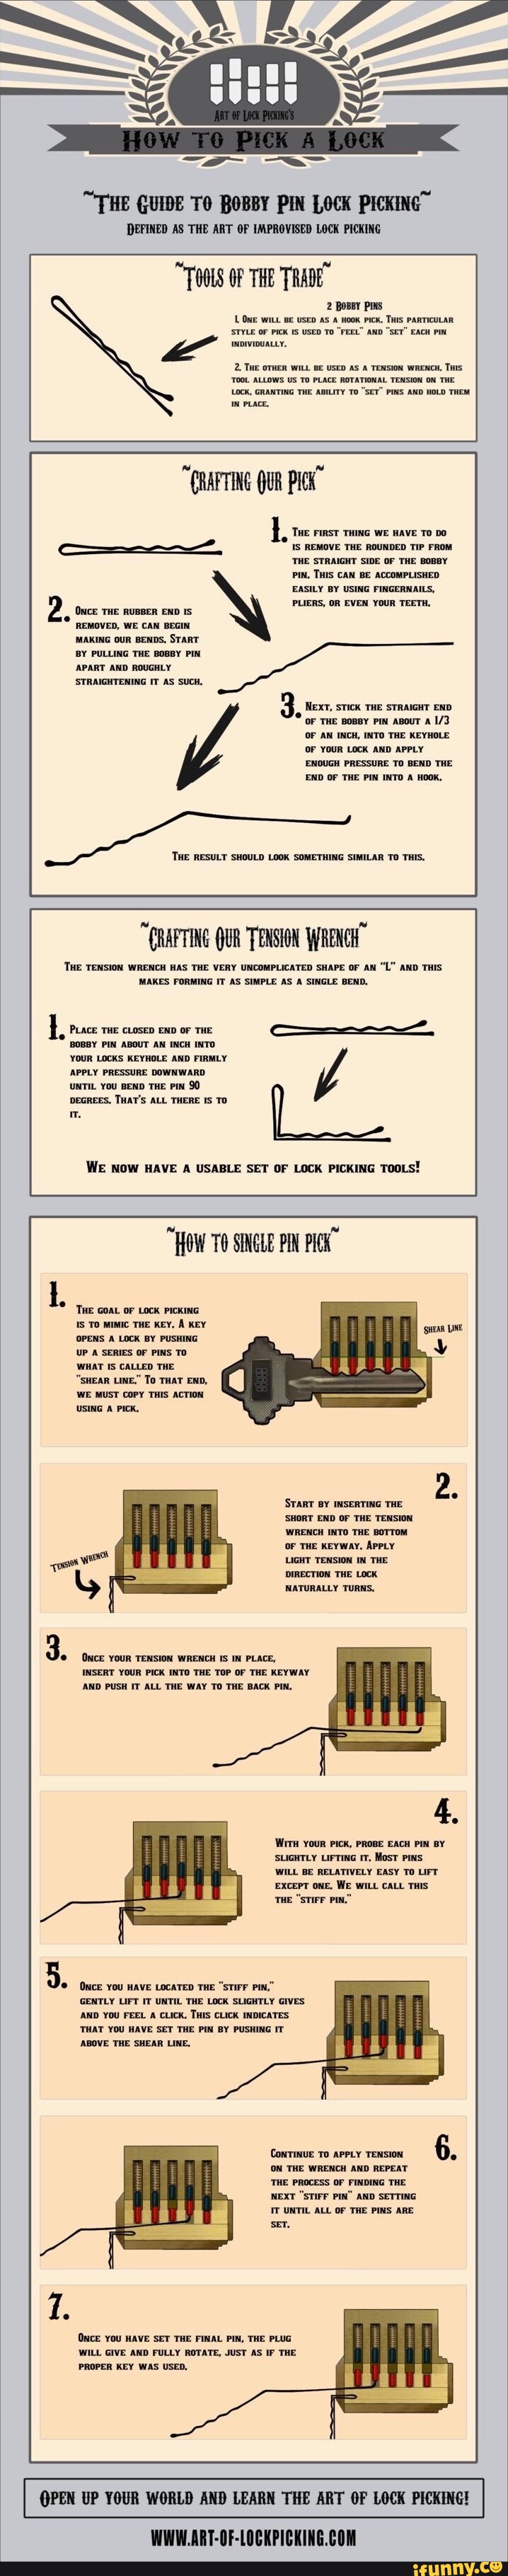 TO PICK THE GUIDE TO BOBBY PIN LOCK PICKING DEFINED AS THE ART OF  IMPROVISED LOCK